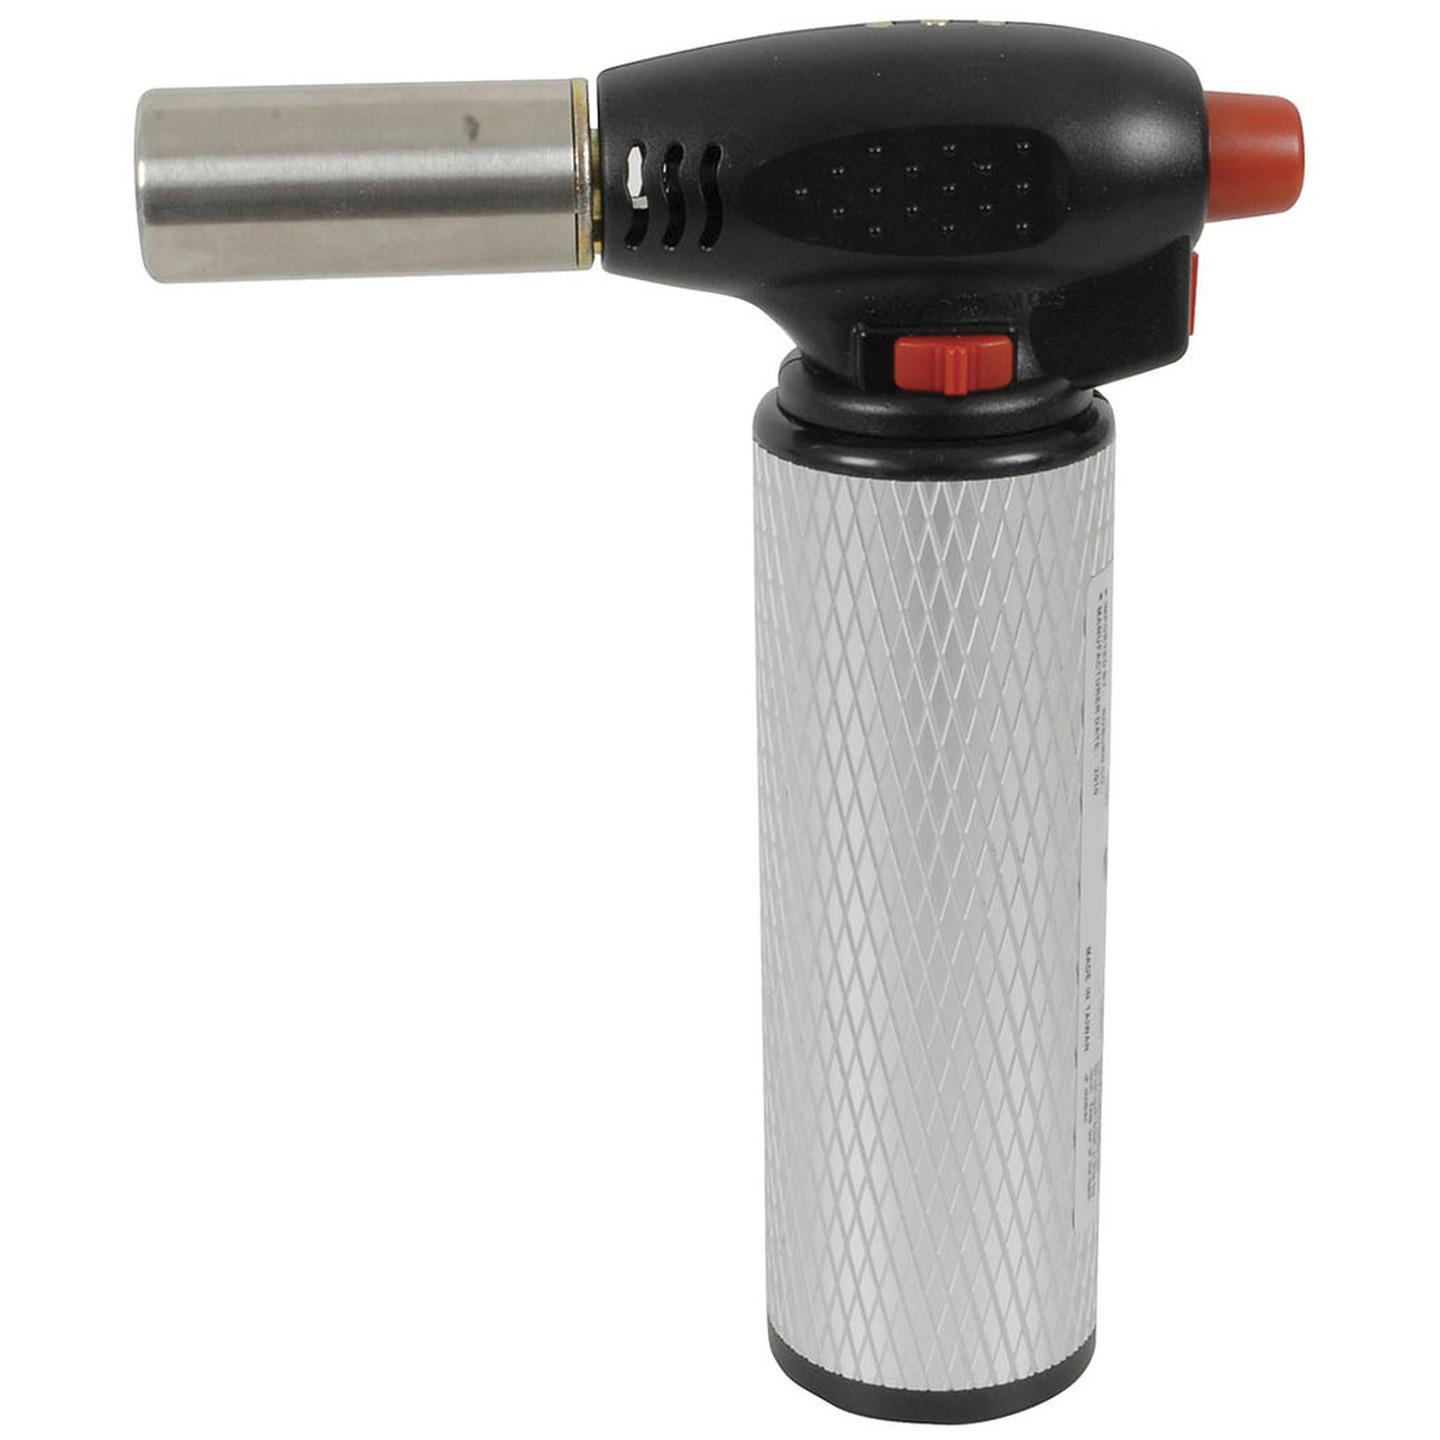 Micro Blow Torch - Large Flame